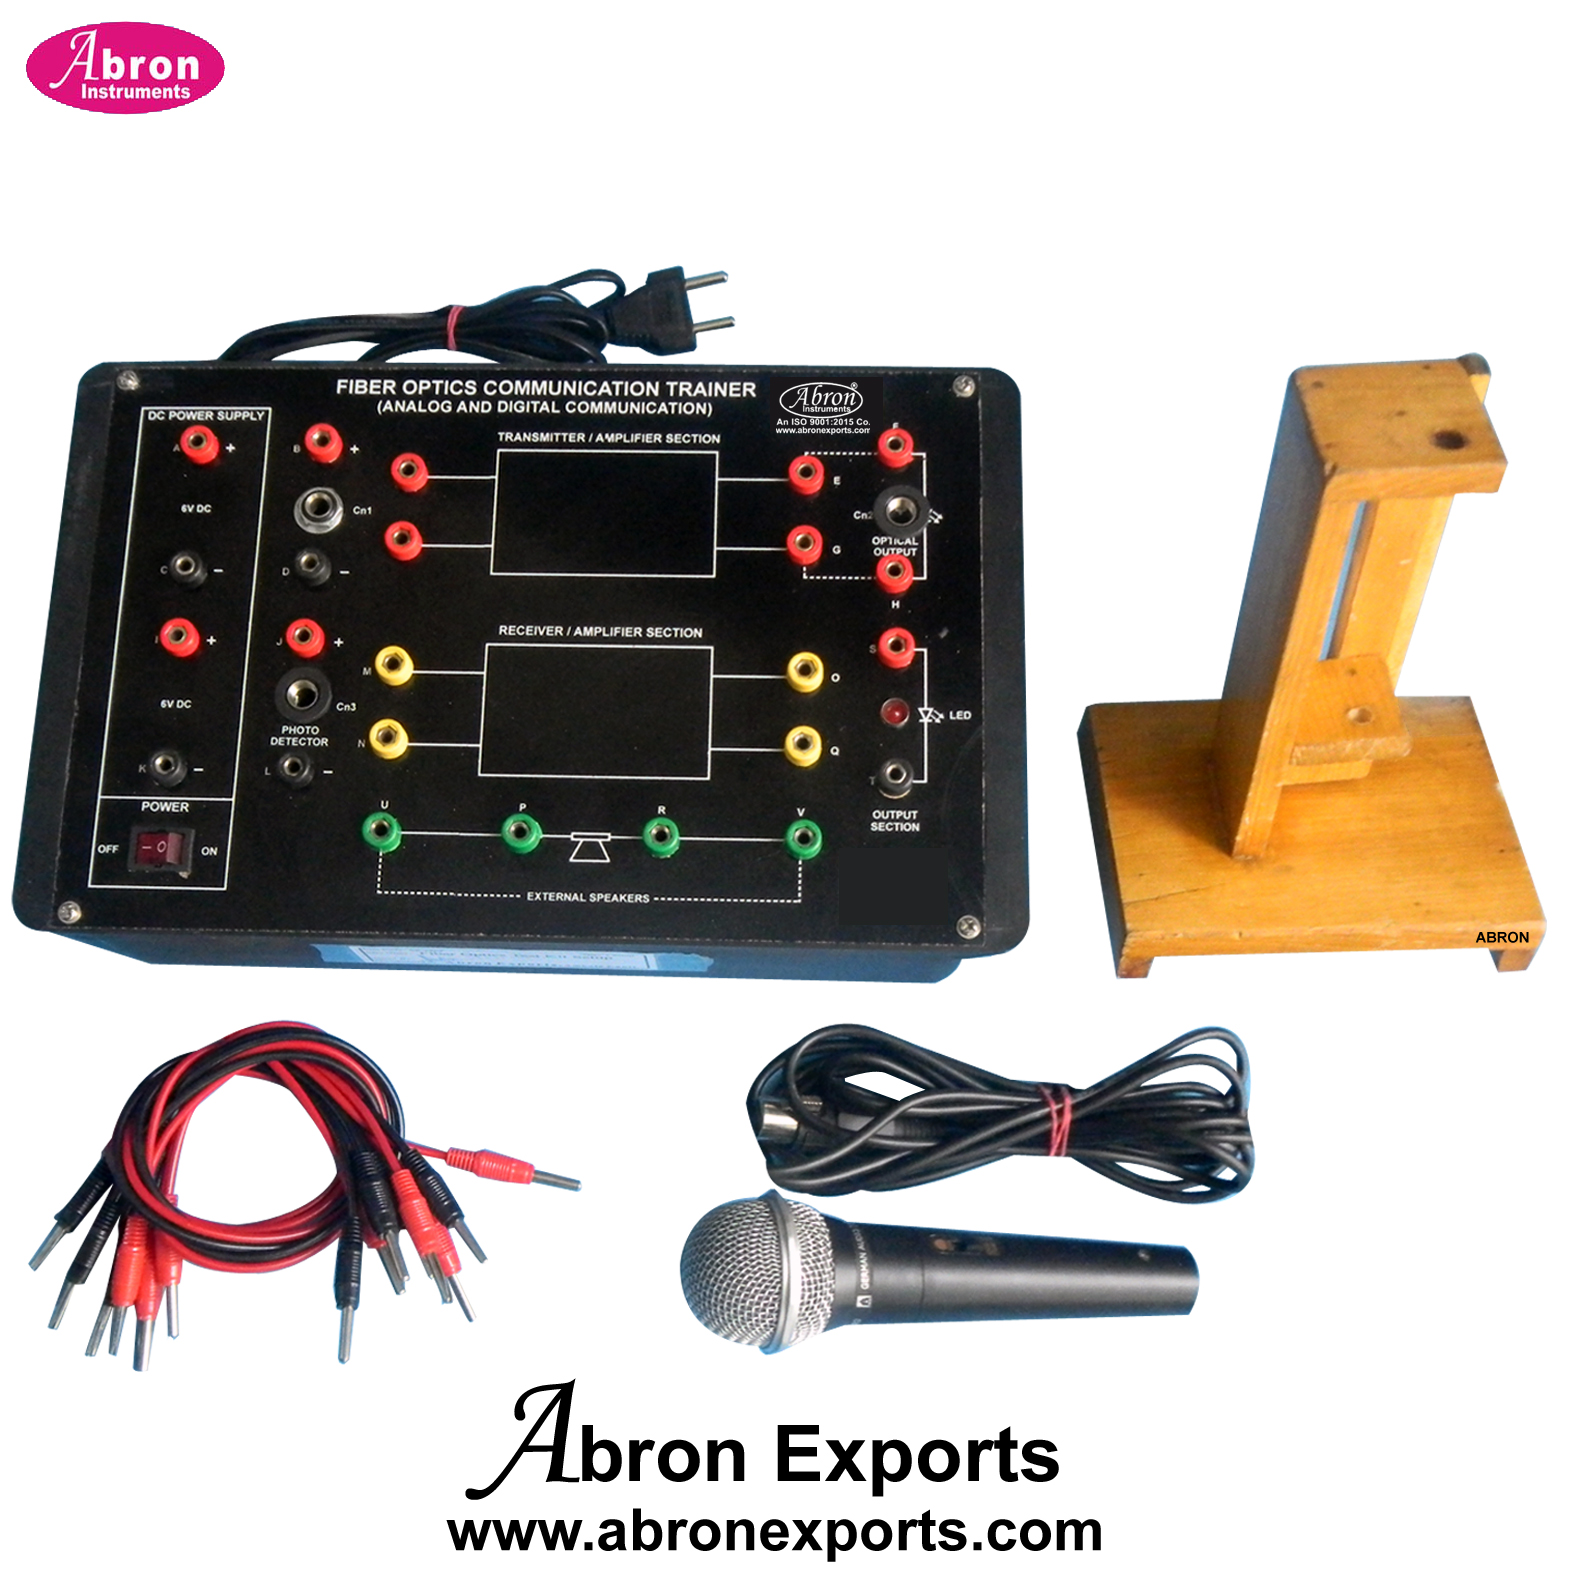 Fibre Optics LED Trainer kit with Power supply AE-1269A